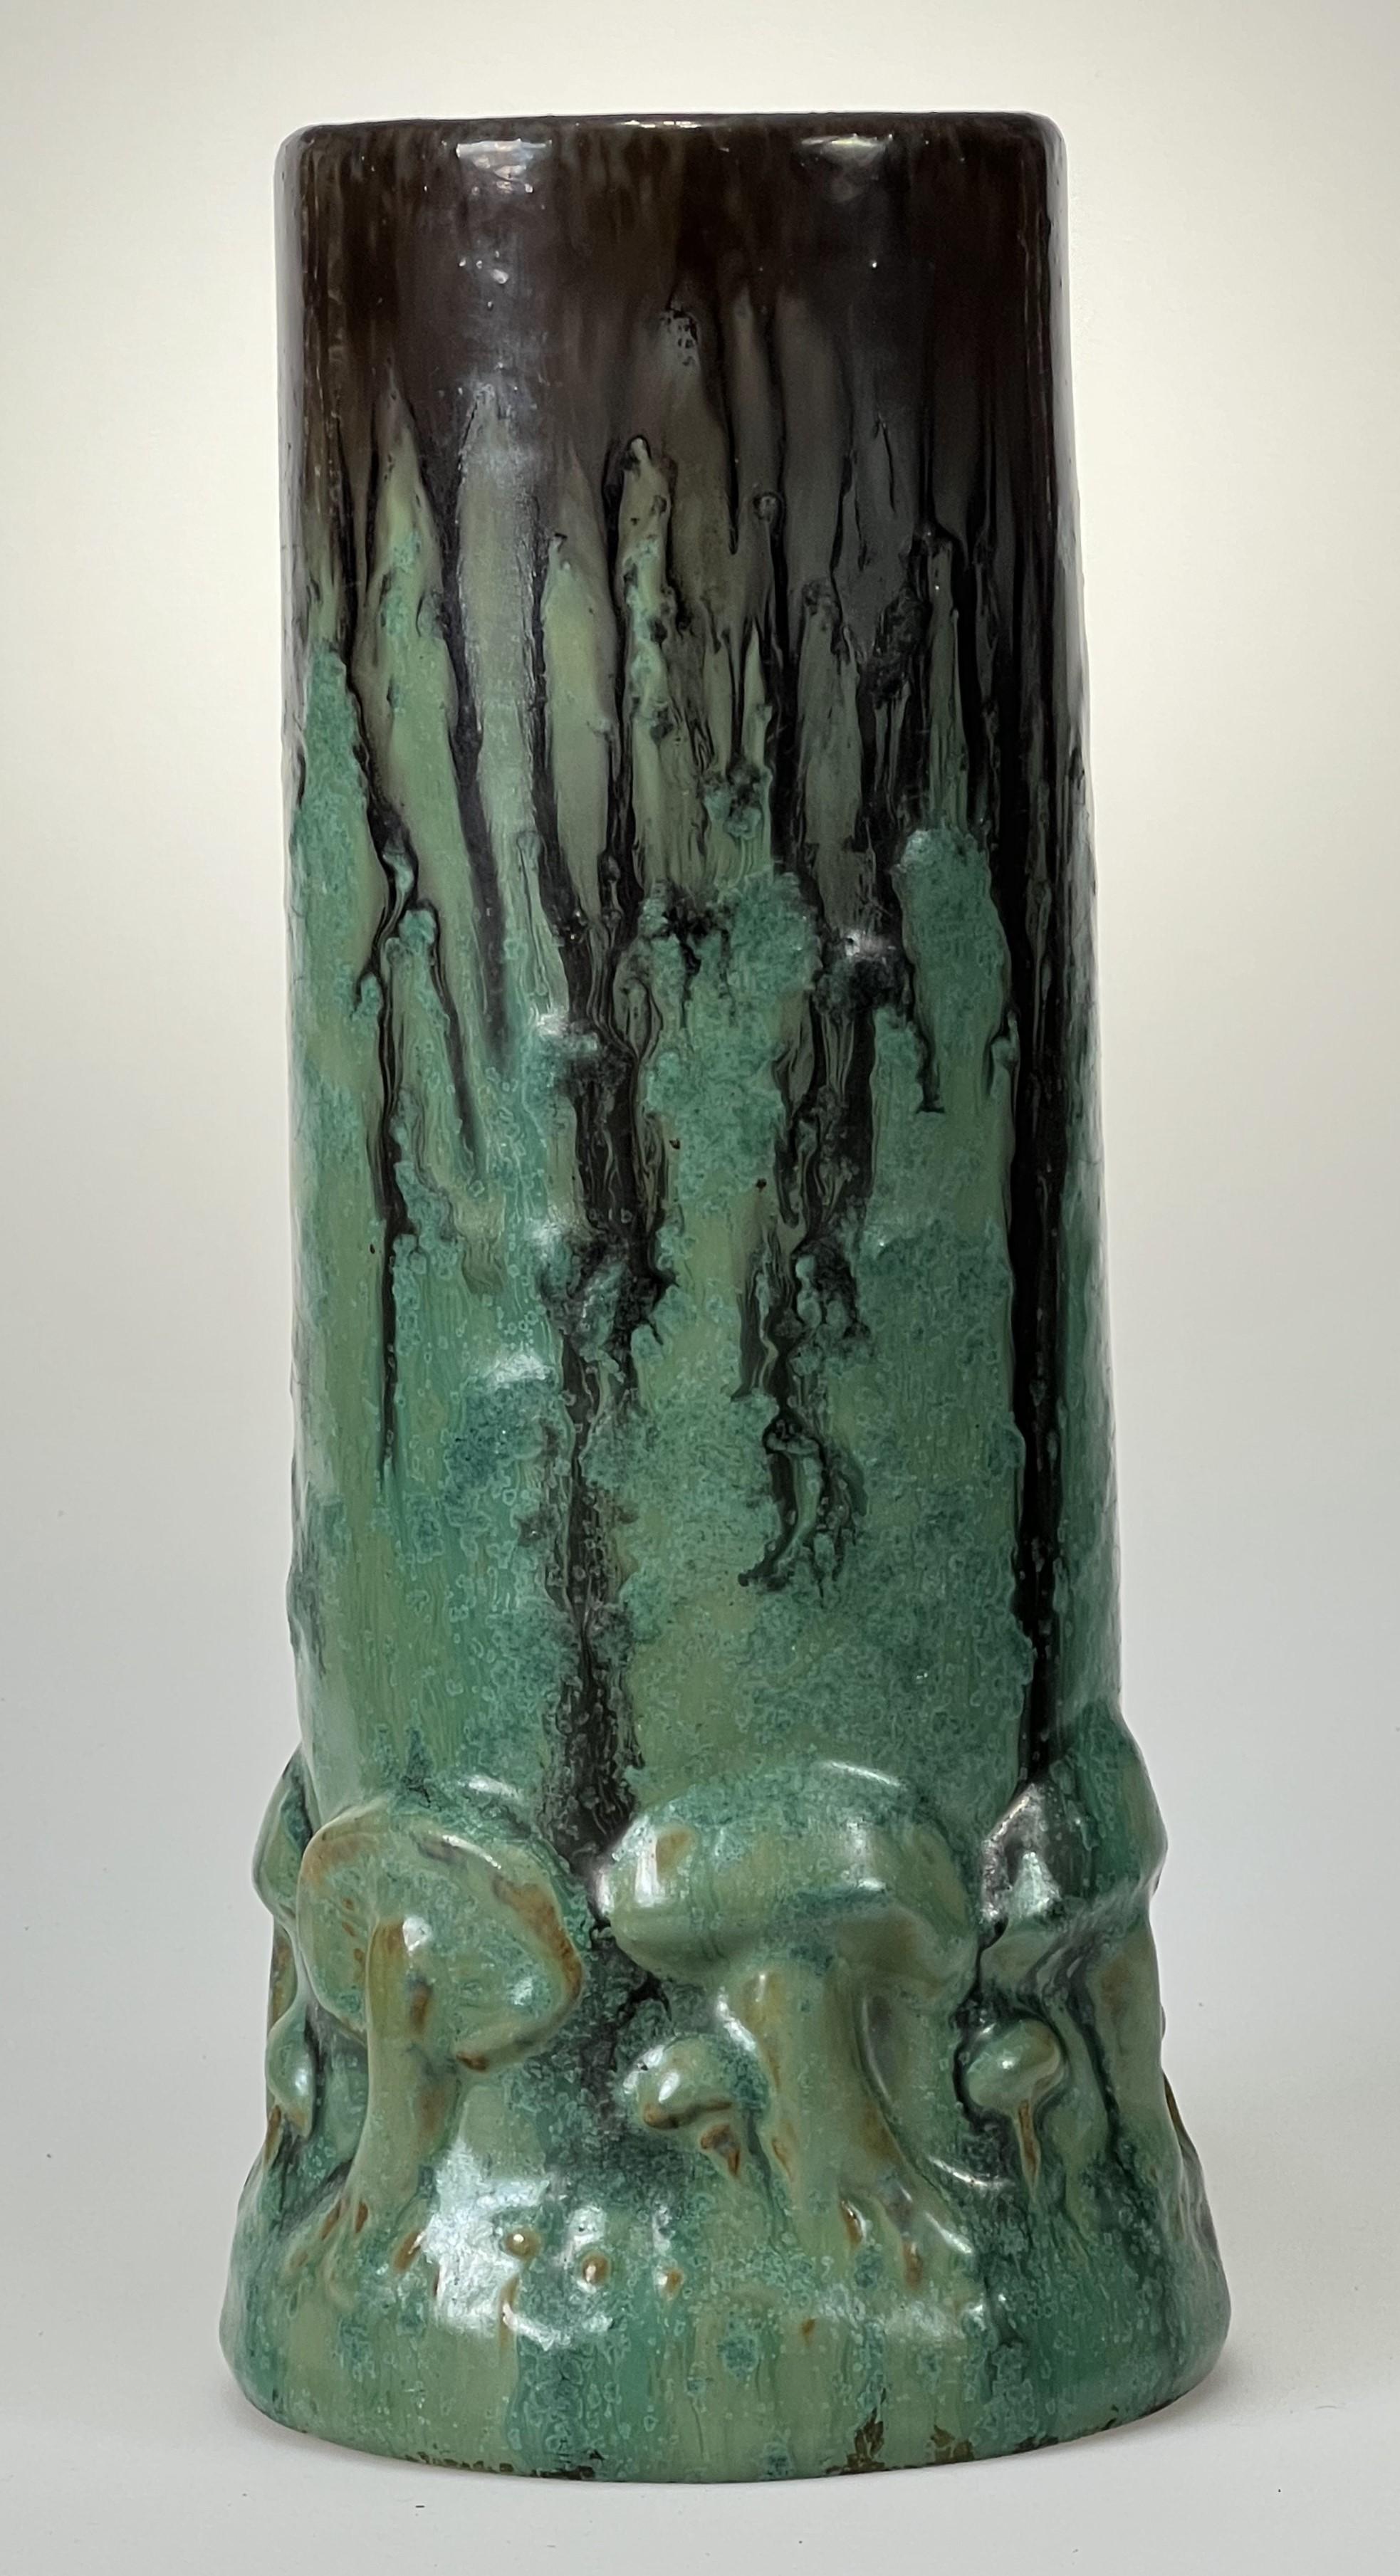 A fantastic Mushroom vase in Fulper's coveted cucumber crystalline with brown/black flambe drips. The glazing is dramatic and includes both crystalline and curdling effects. This is New York/New Jersey Arts and Crafts at it's best and yet they